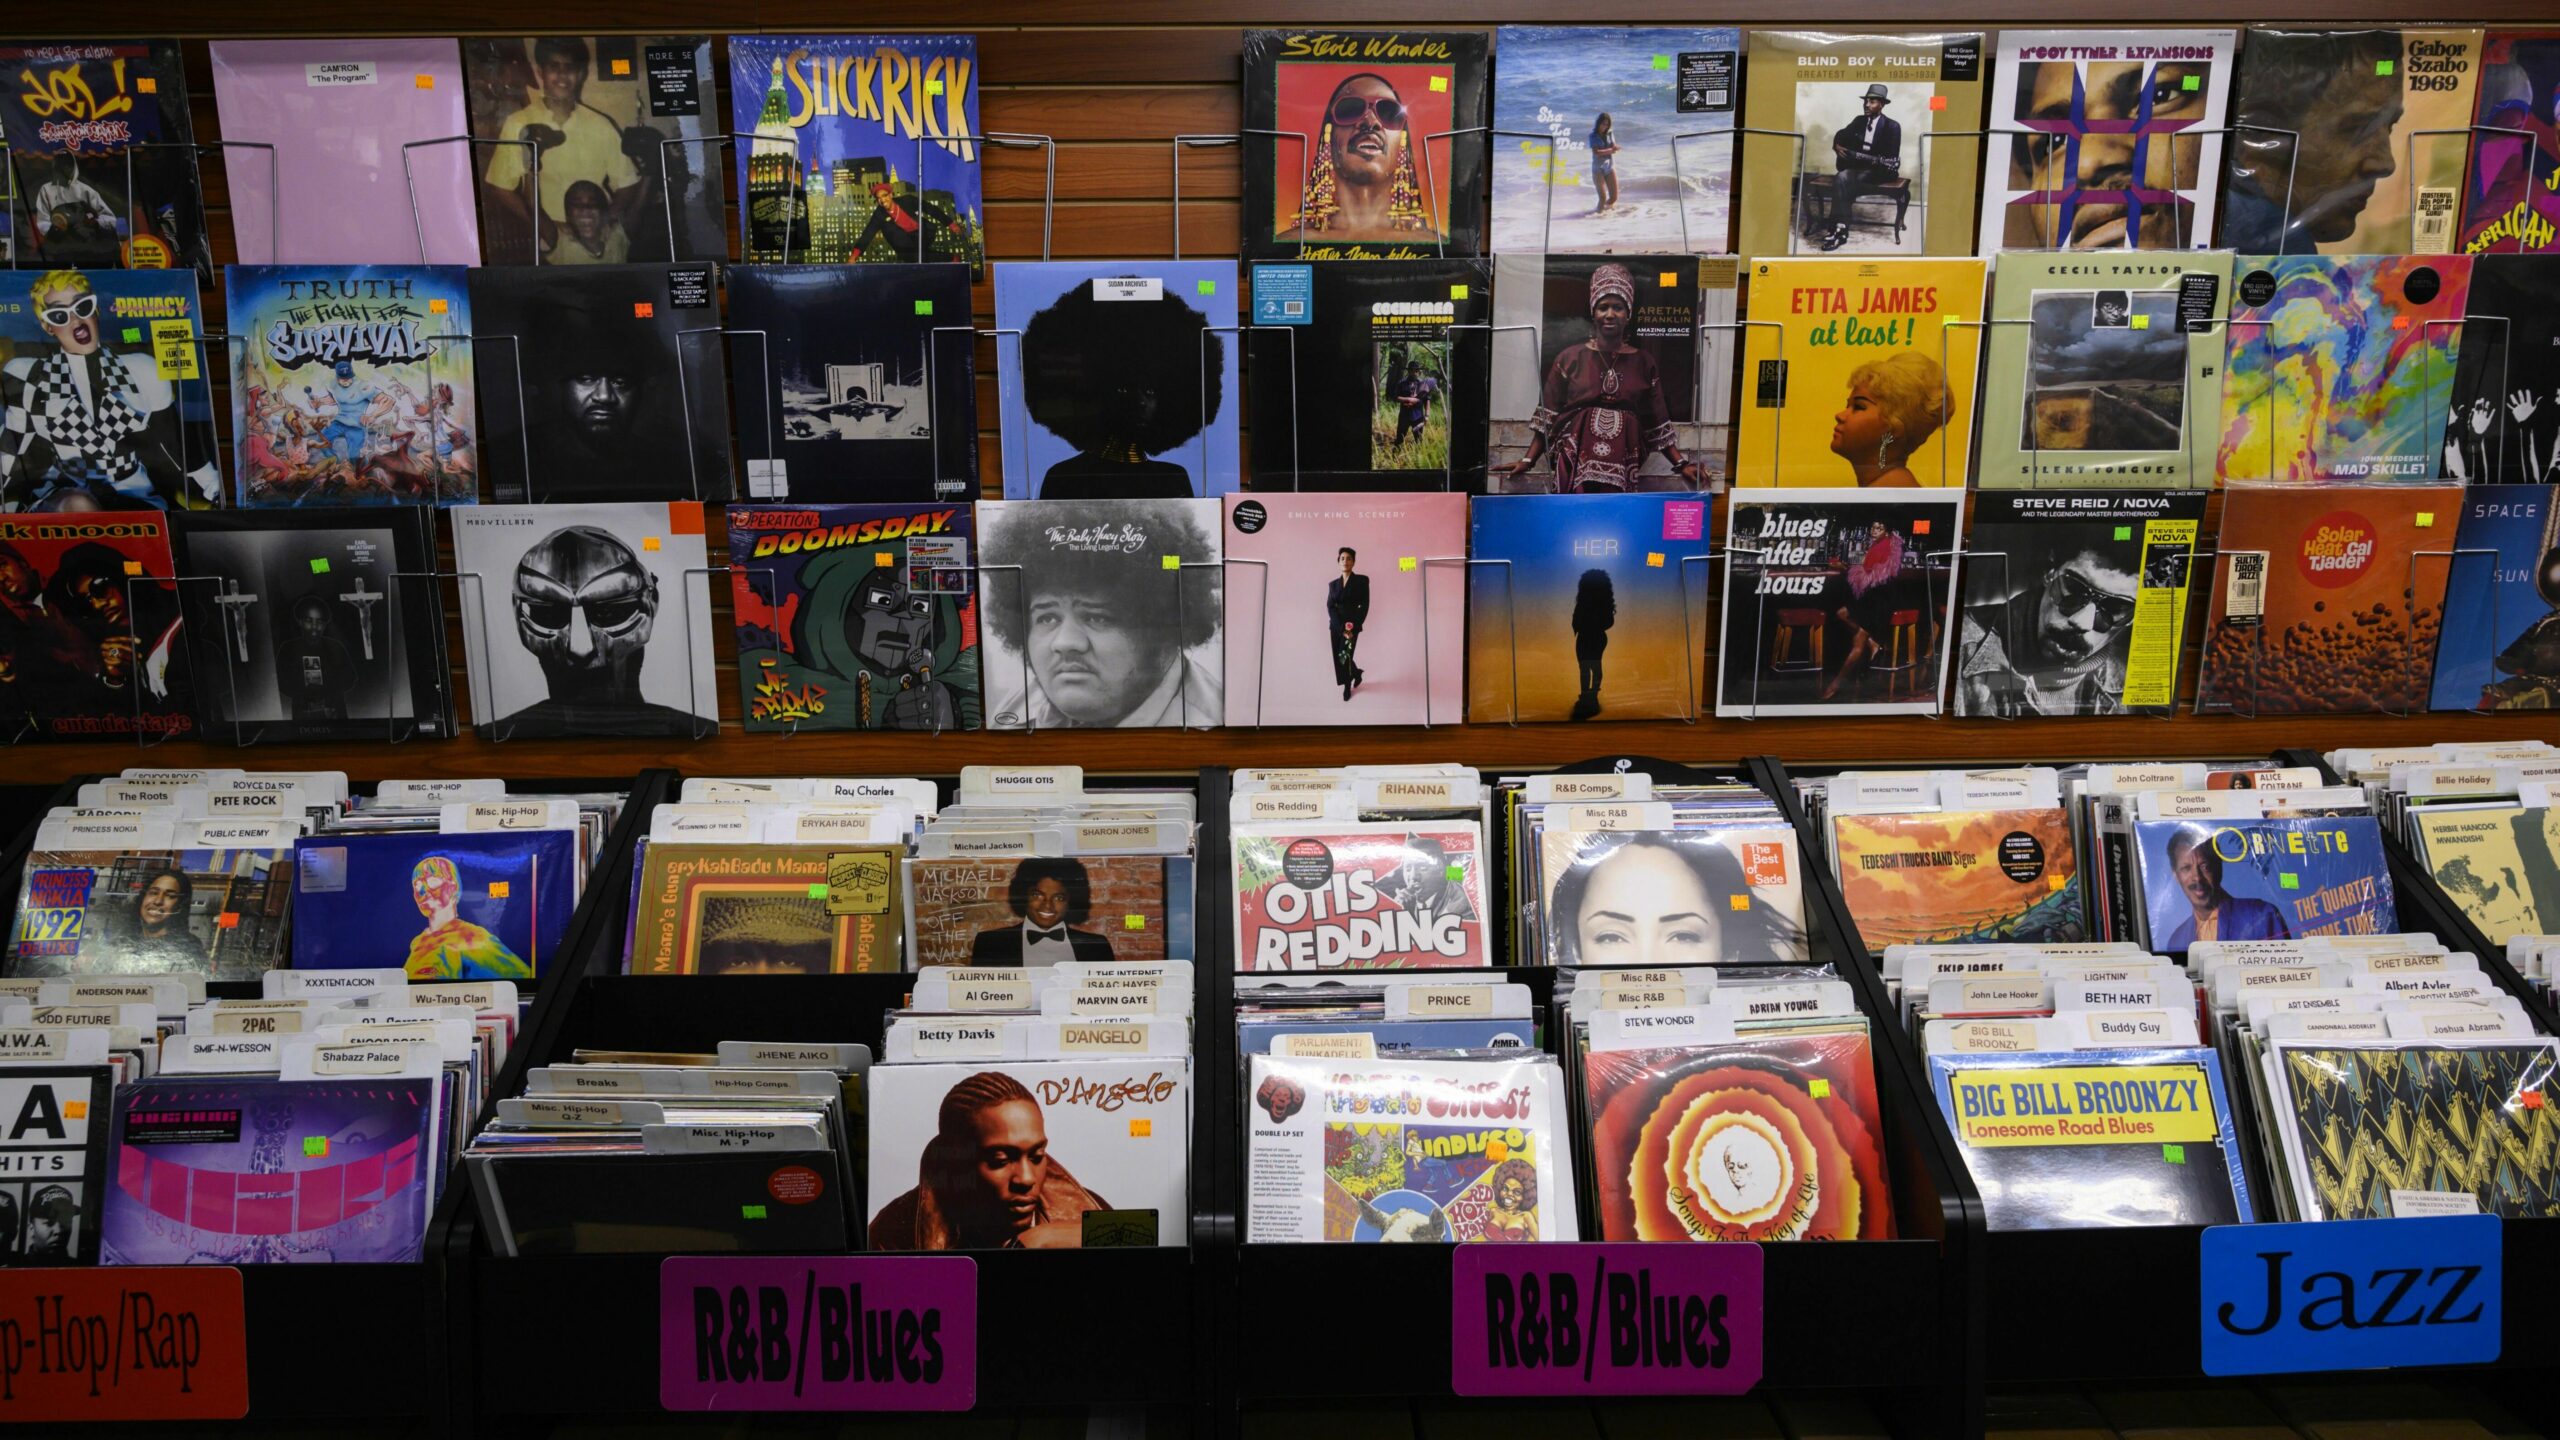 Vinyl Records are seen for sale at the Sound Garden record shop in Fells Point, Baltimore.